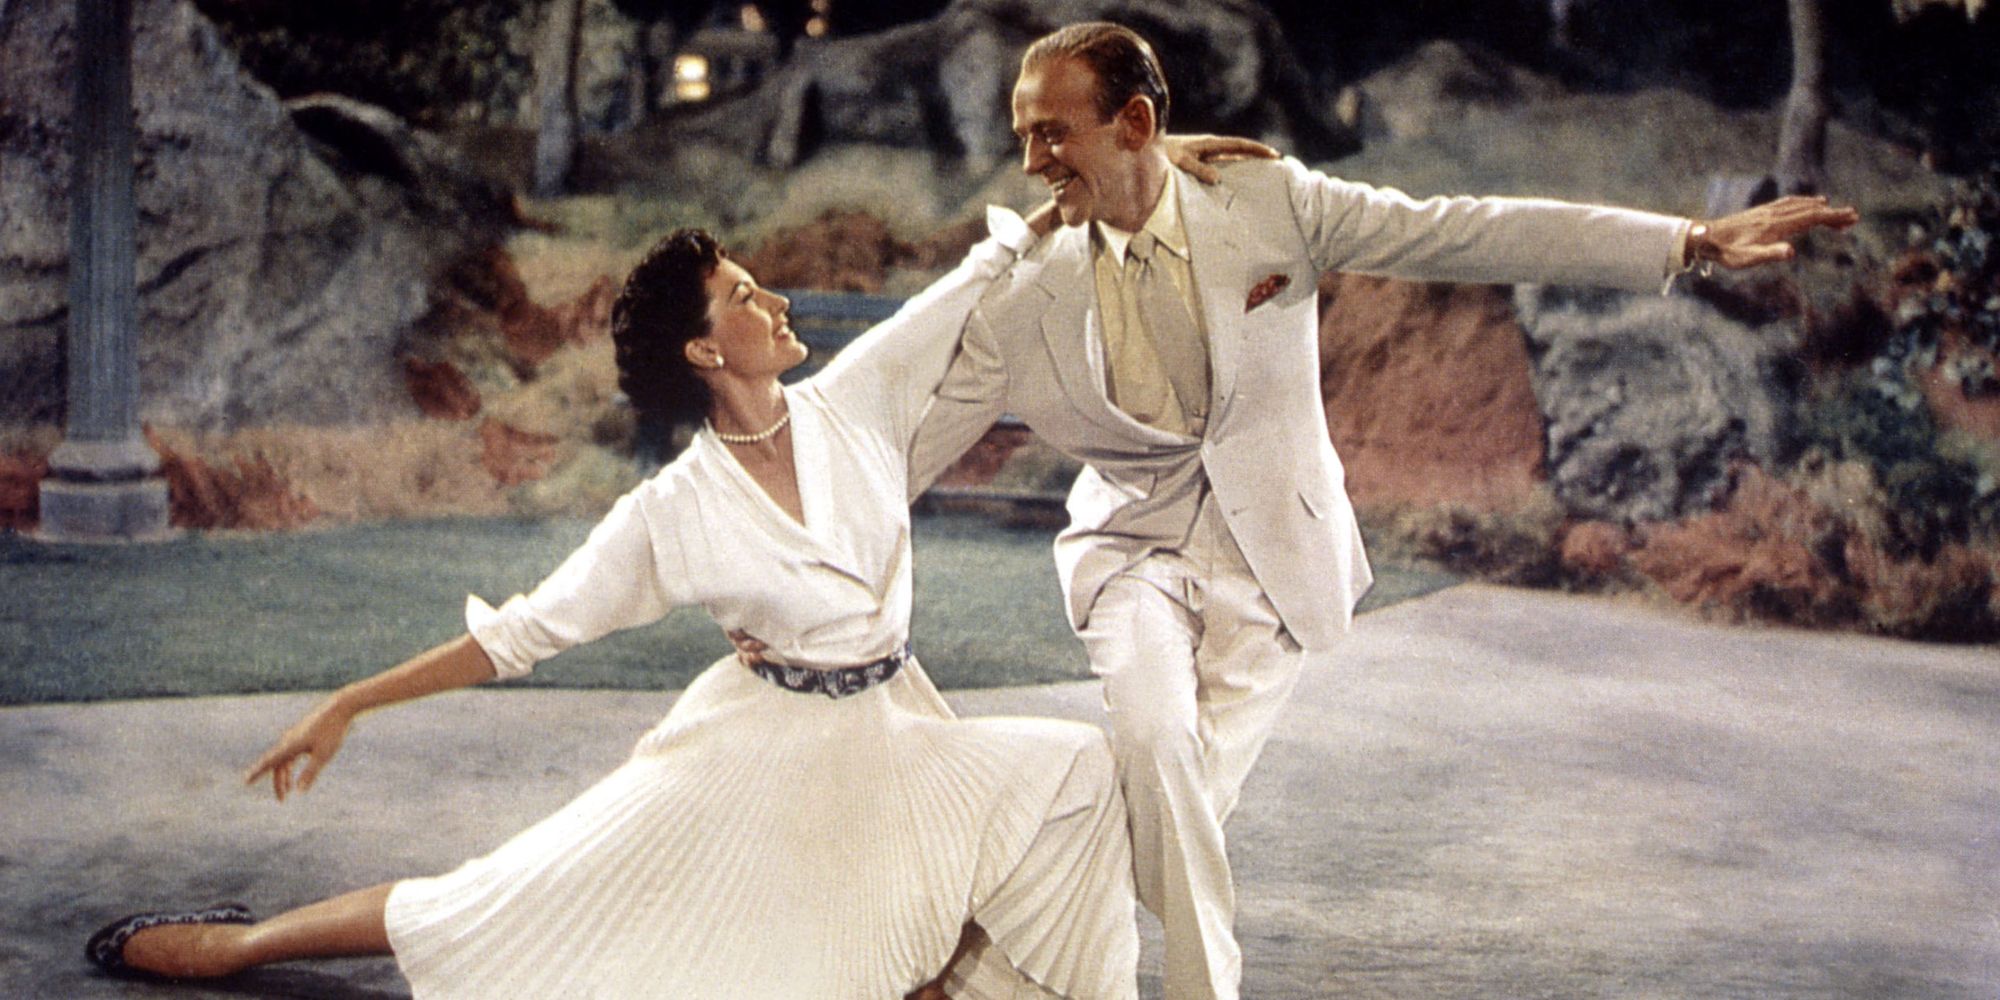 Fred Astaire and Cyd Charisse as Tony and Gabrielle dancing in The Band Wagon